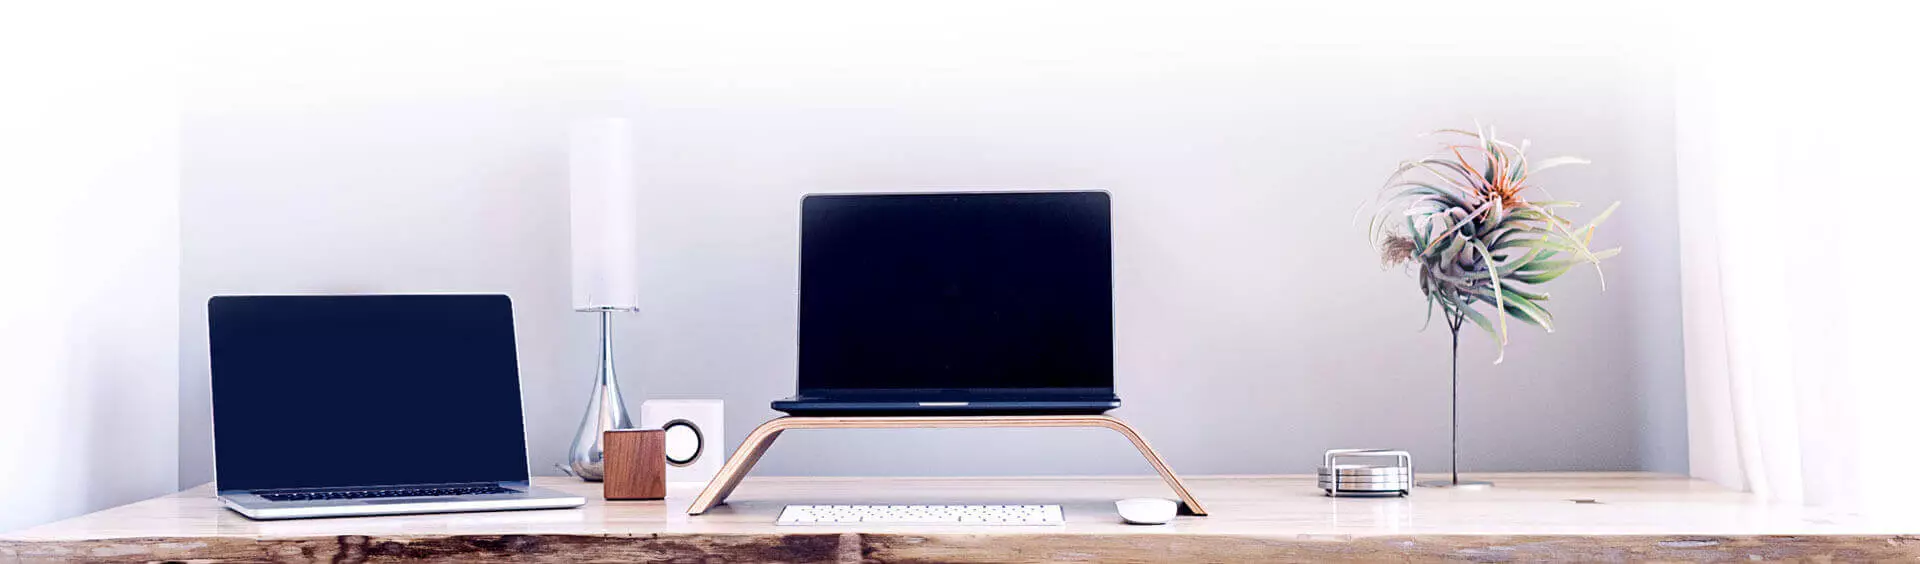 workspace with two macs and a keyboard